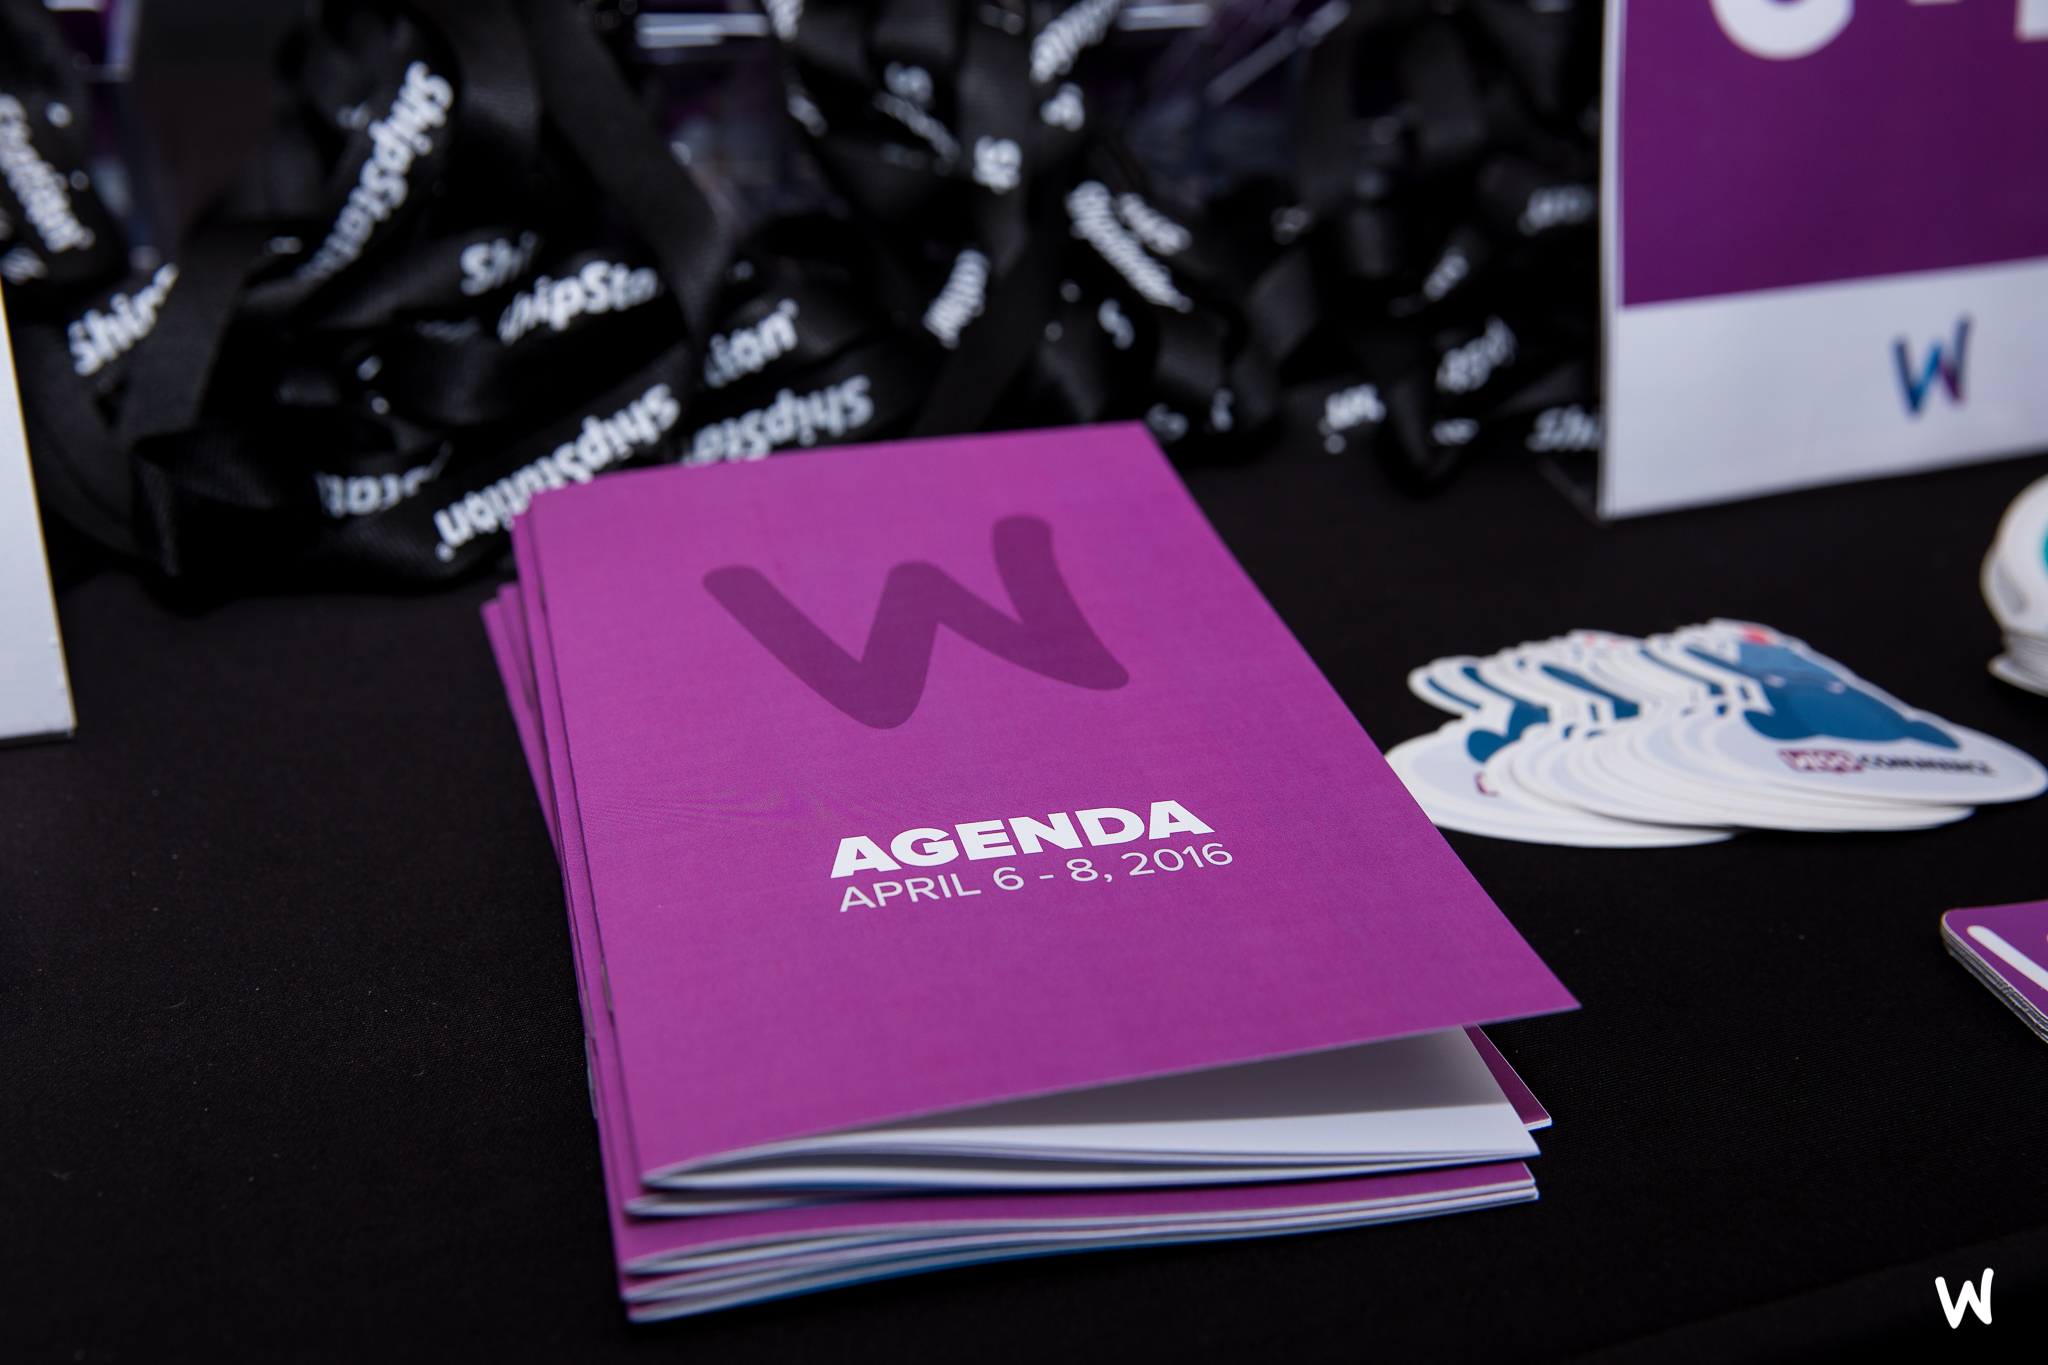 Between April 6 and 8, hundreds of WooCommerce store owners, developers, and team members descended on Austin to celebrate our second annual WooConf.